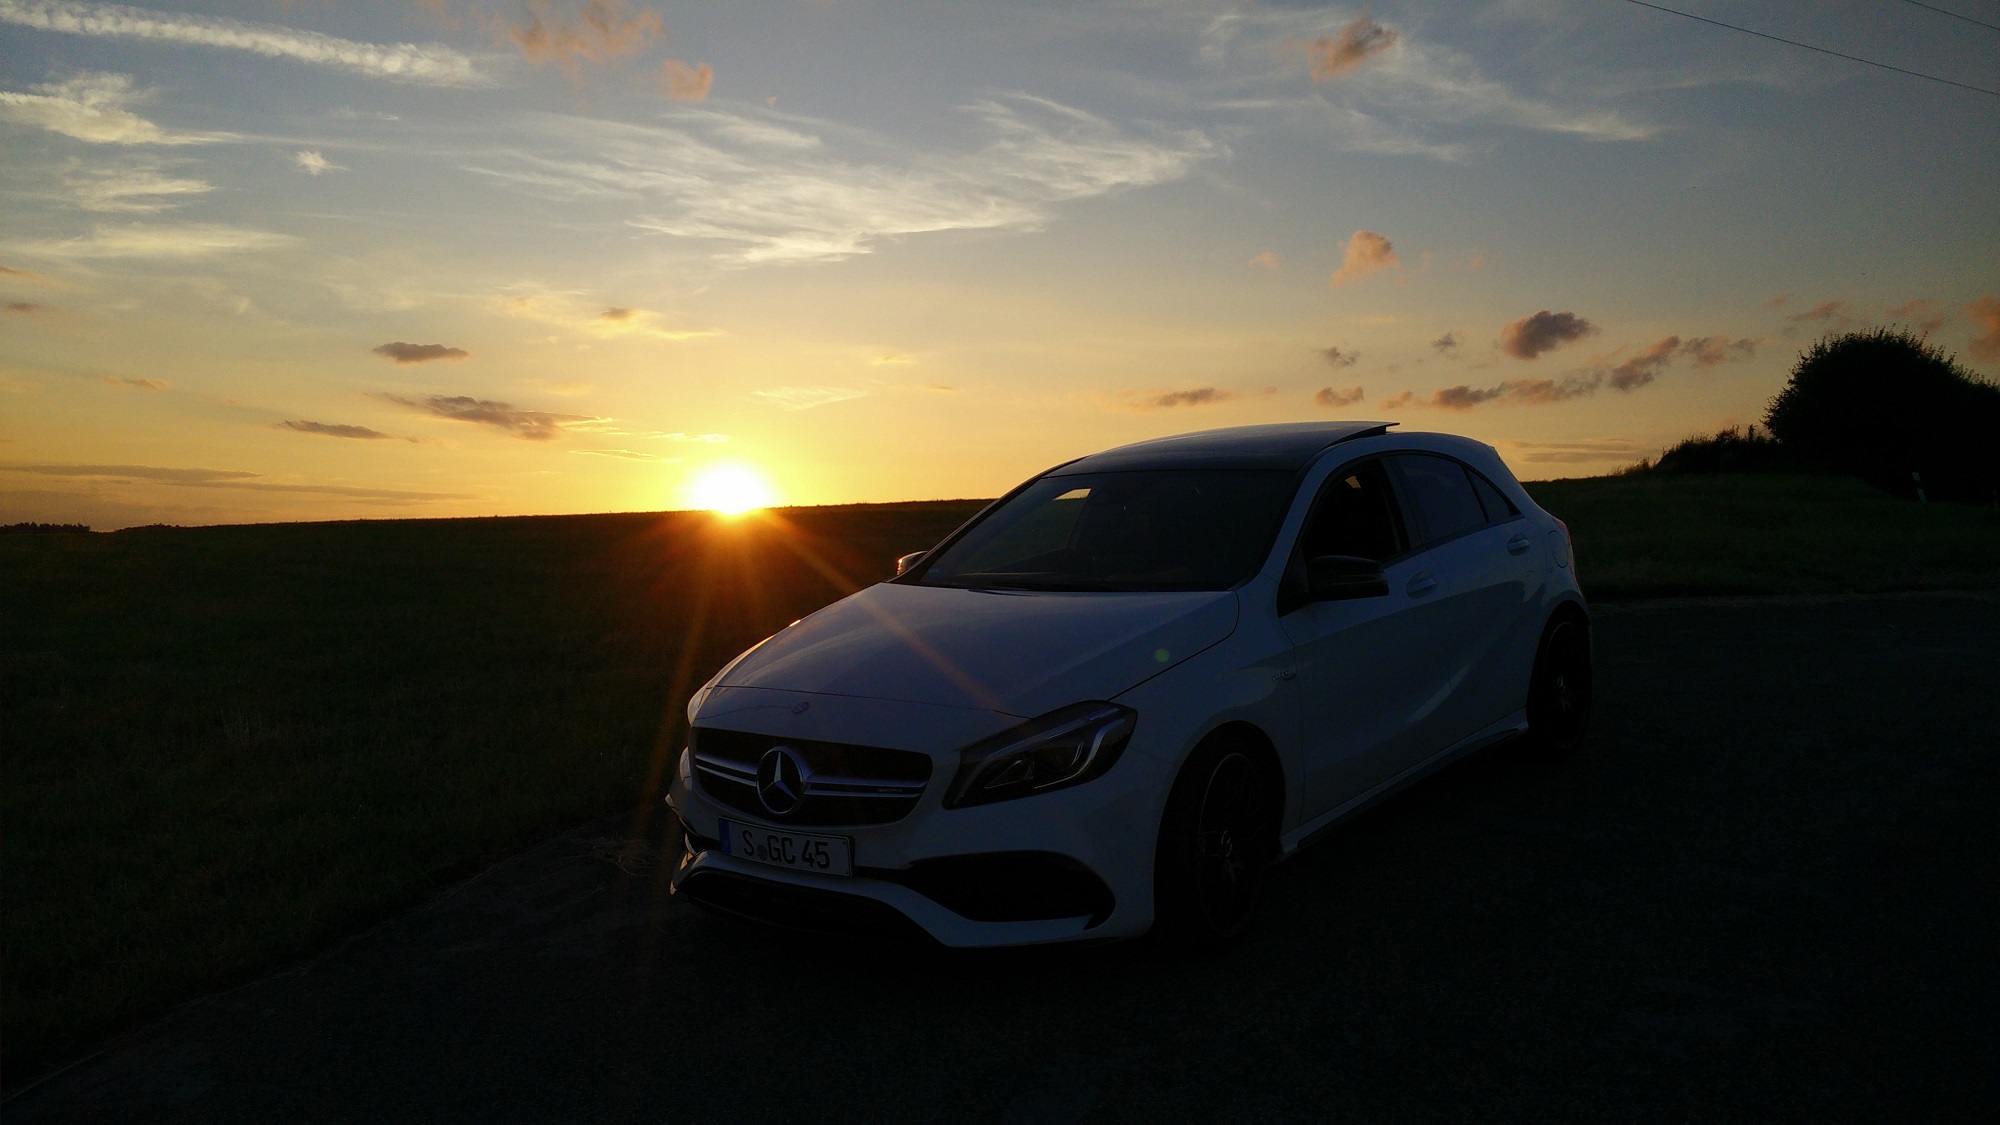 [Video] Pure Driving – AMG A45 meets Murrhardt